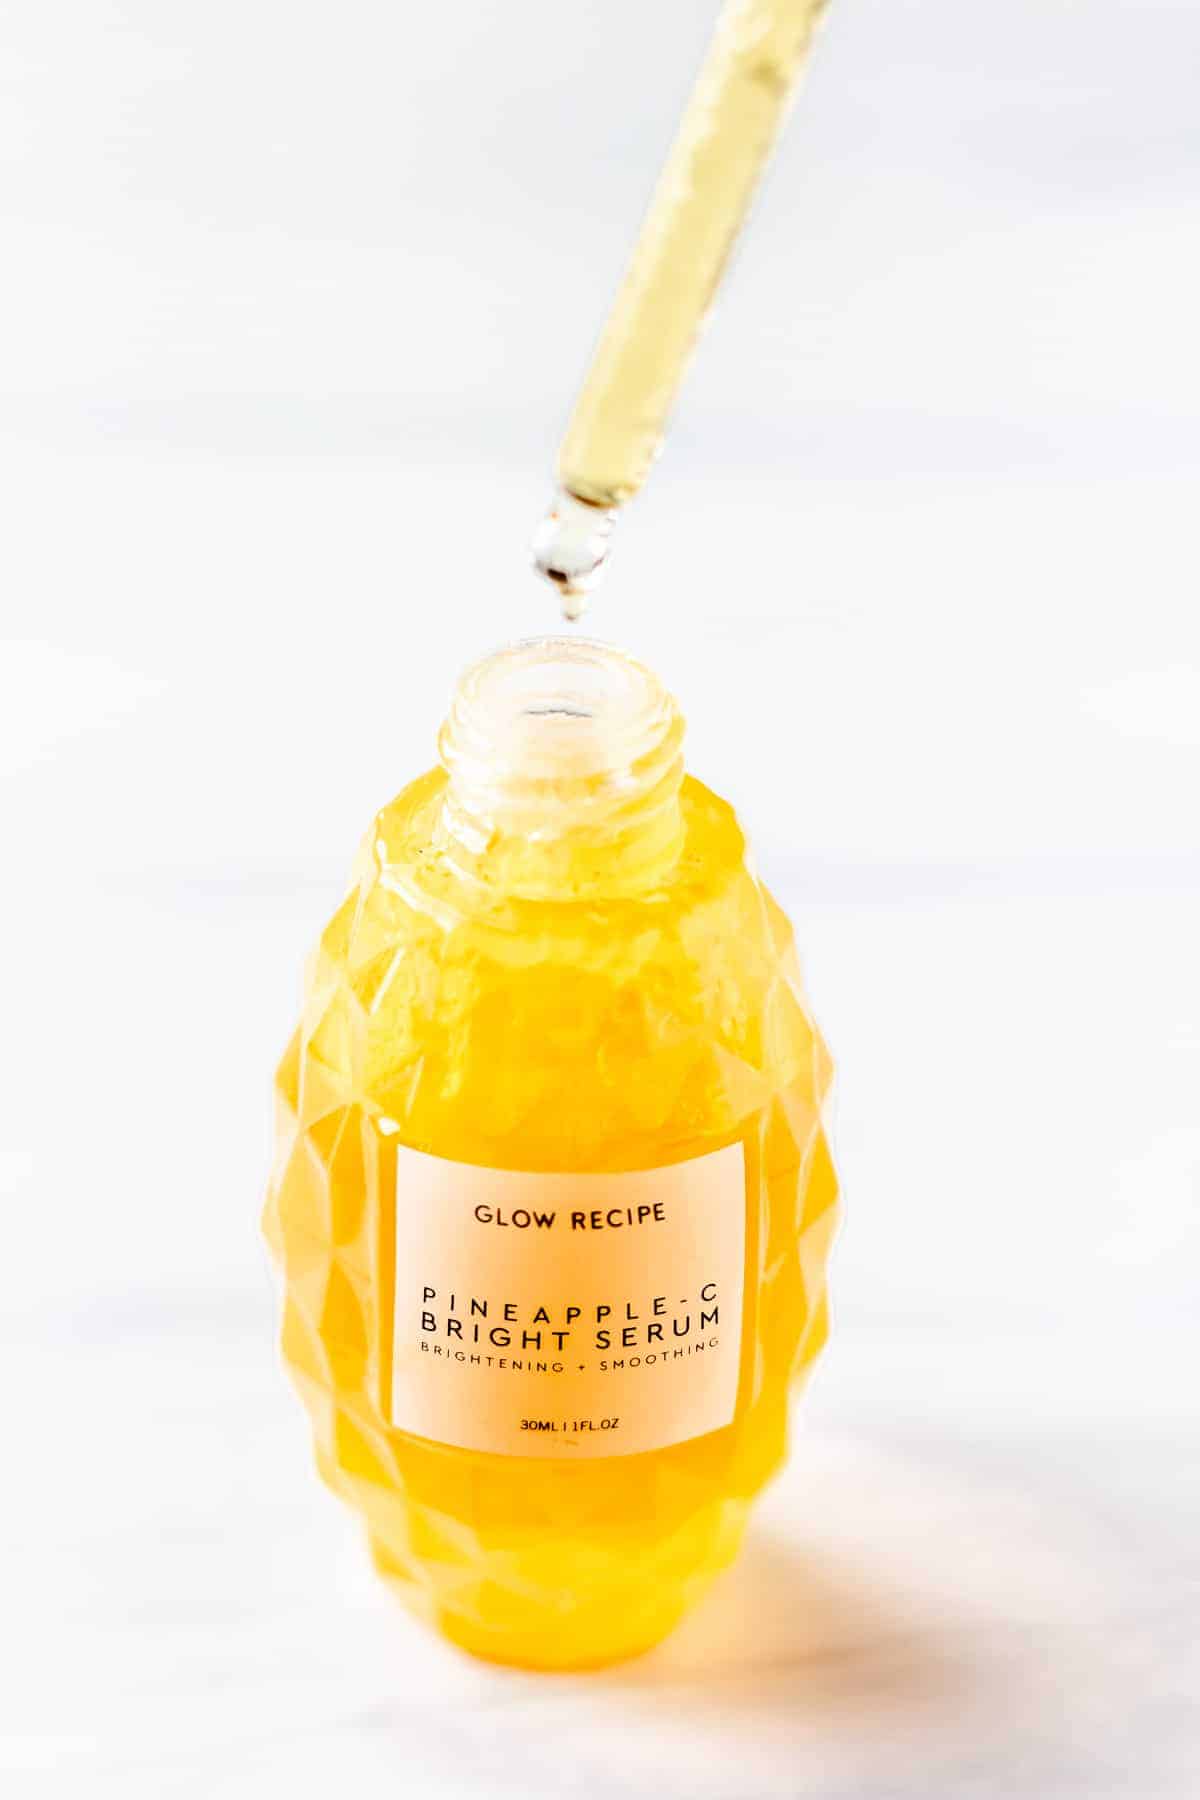 A dropped full of Glow Recipe Pineapple-C Bright Serum being held over the bottle.